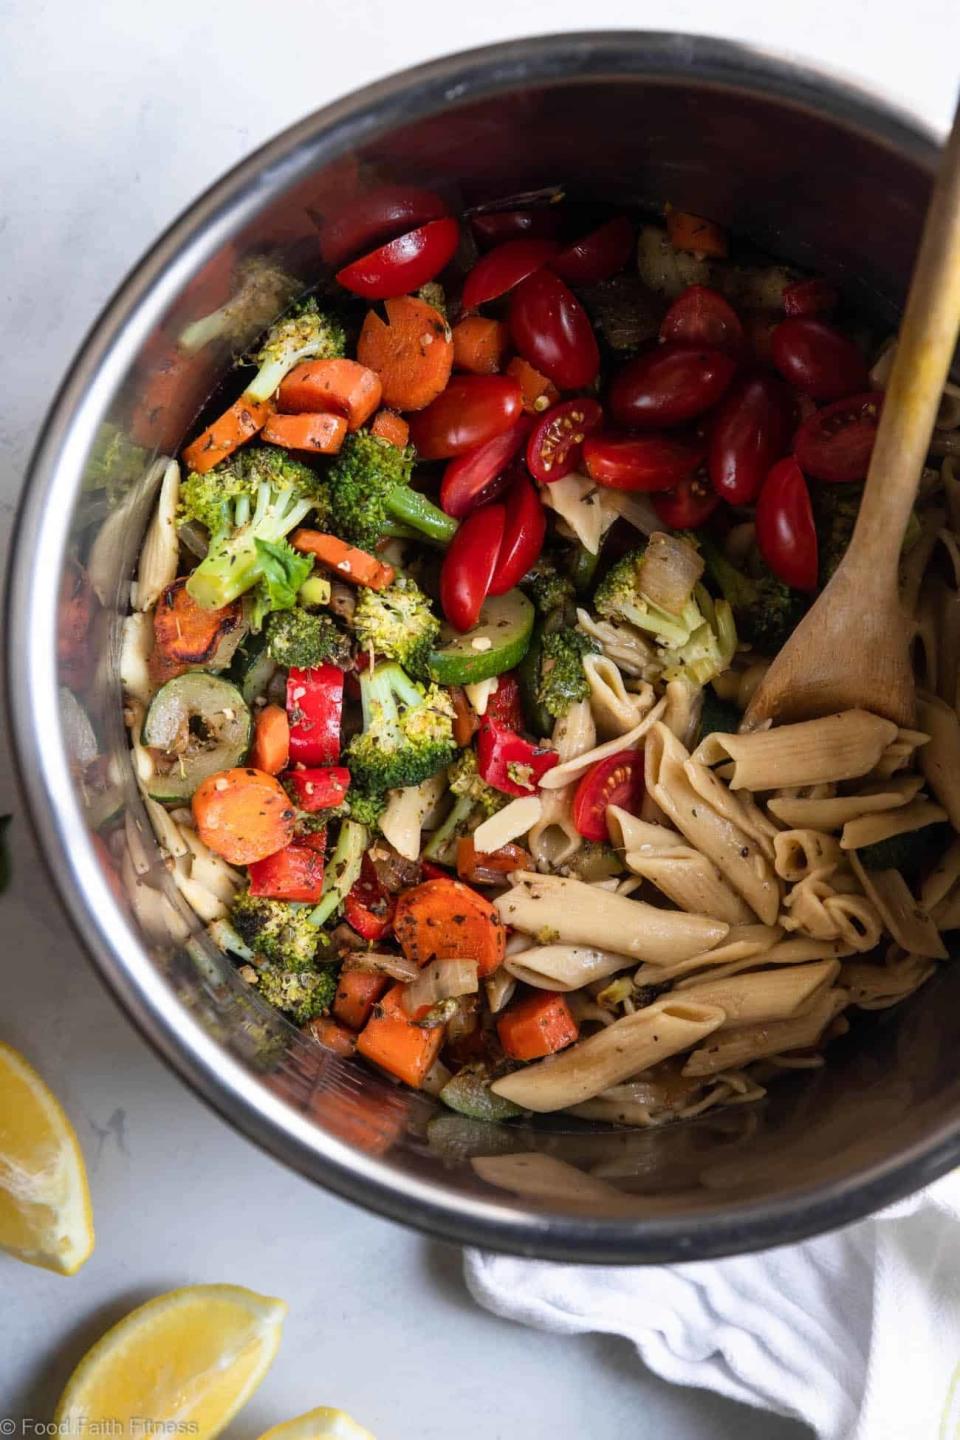 Loaded with vegetables — plus an extra boost of protein from using chickpea noodles instead of traditional ones. Recipe: Instant Pot Pasta Primavera